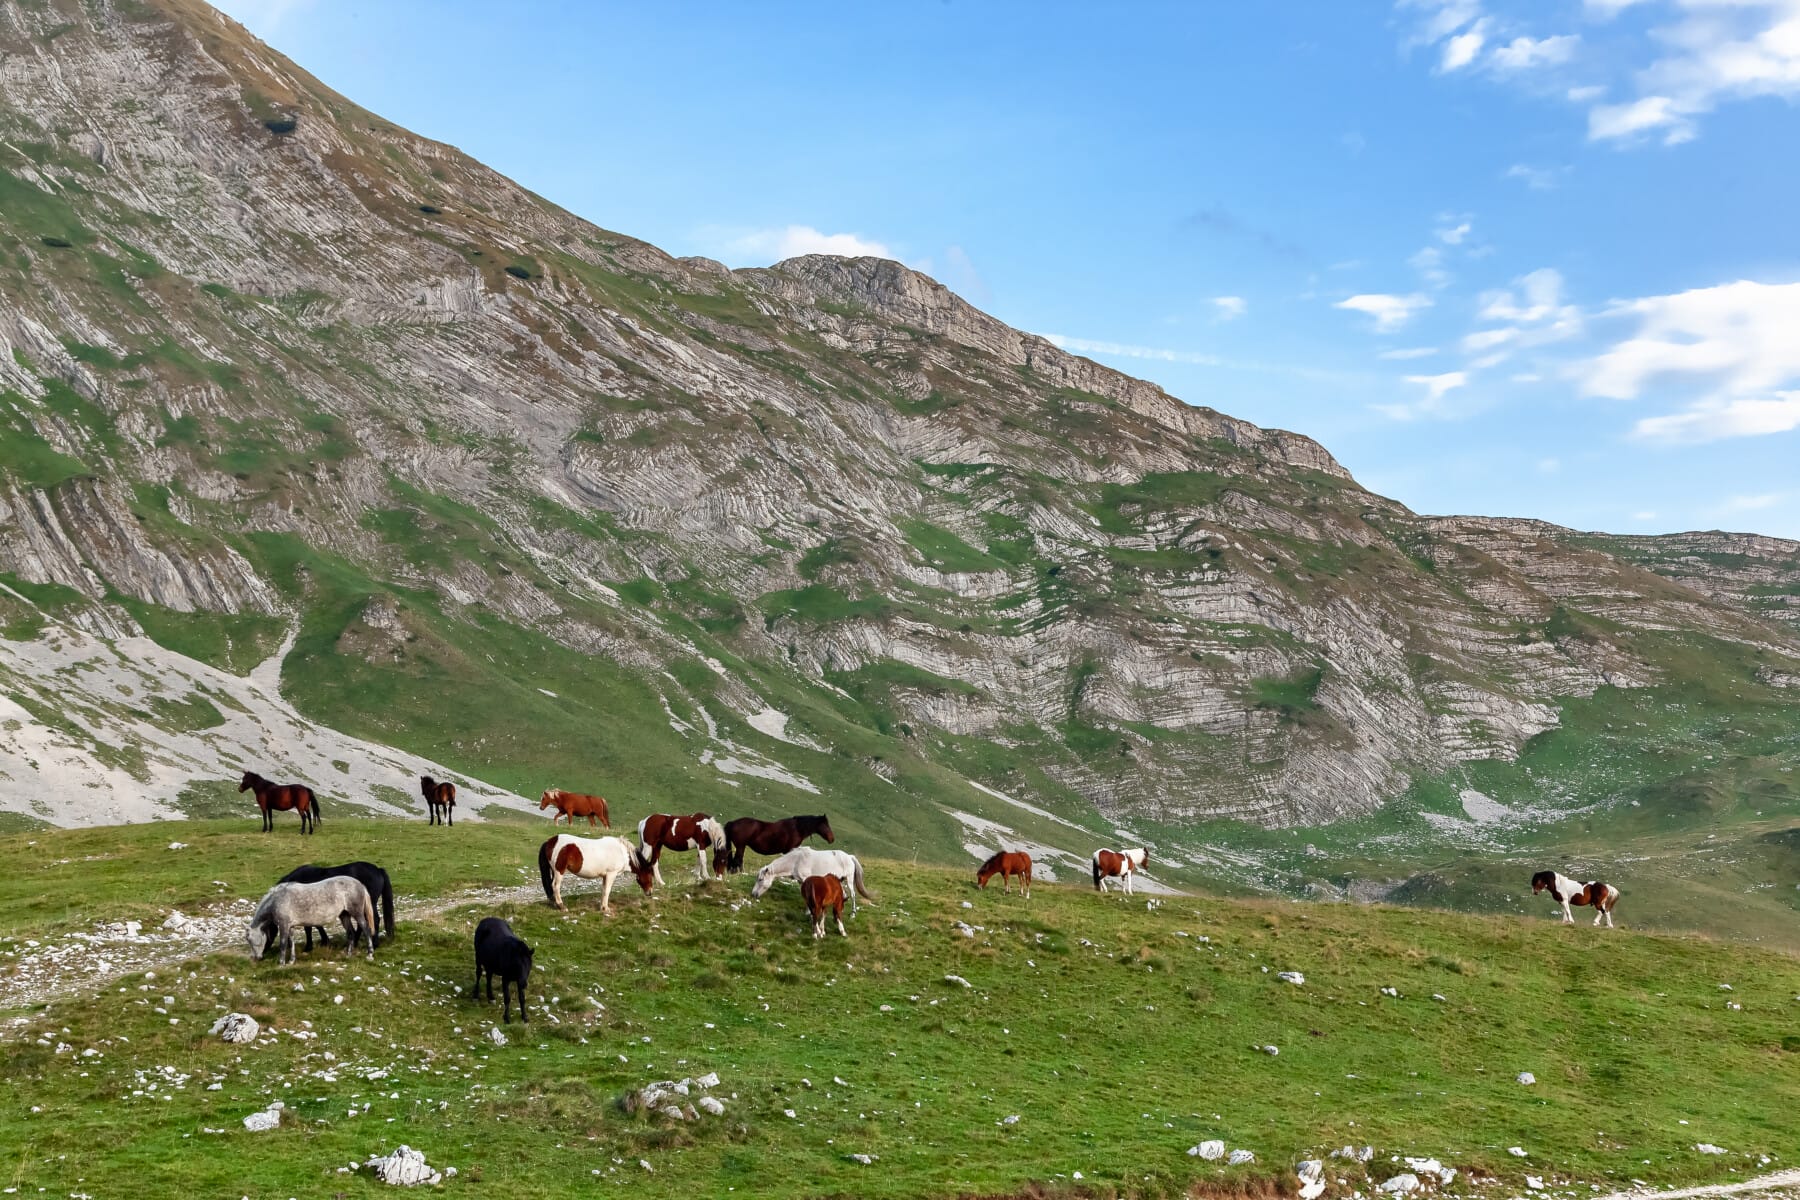 Montenegro, Durmitor national park, Dinaric alps, Horses grazing in a green meadow